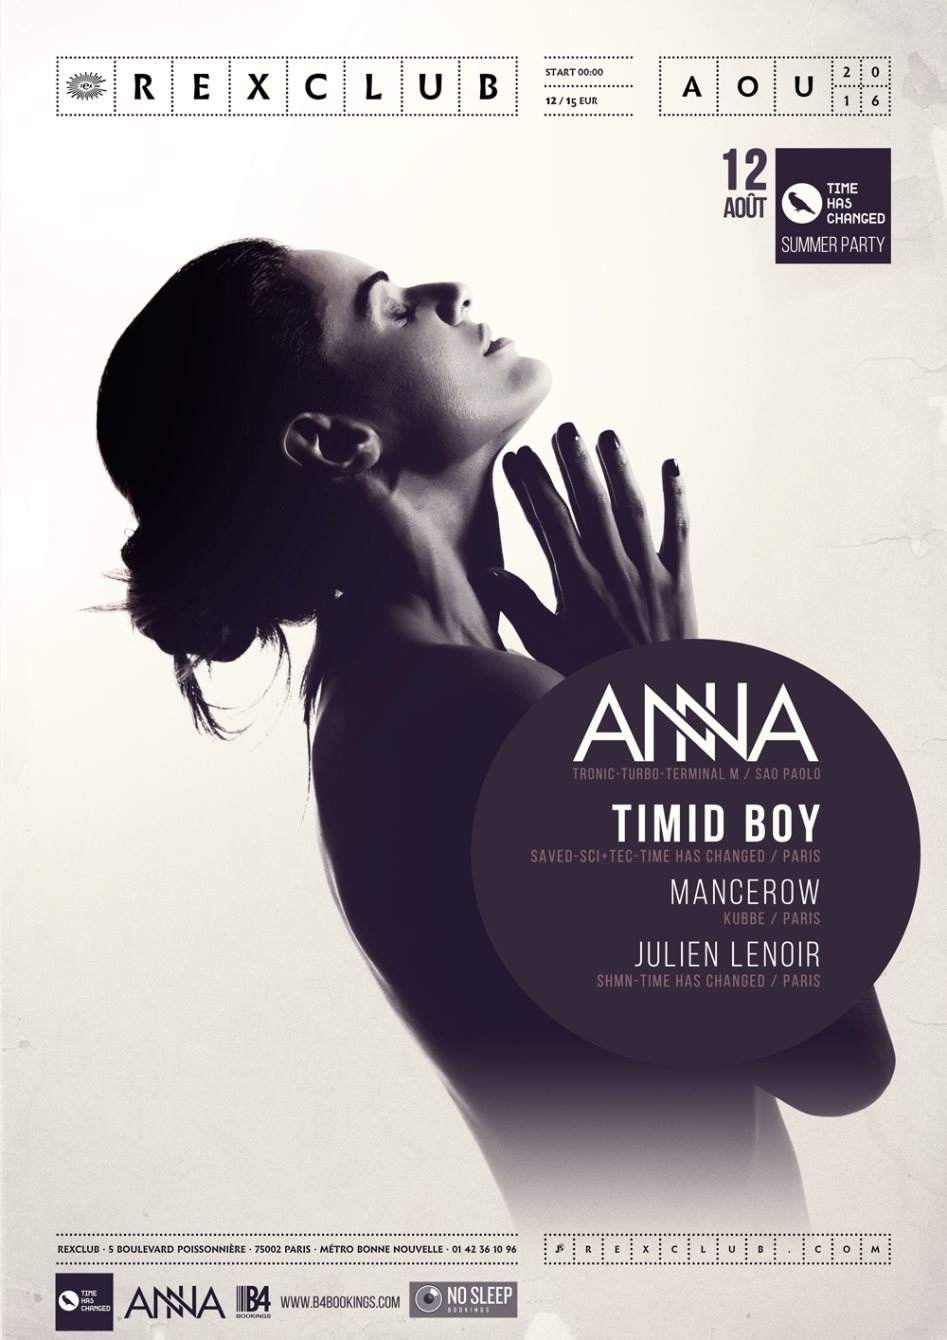 Time Has Changed Summer Party: Anna, Timid Boy, Mancerow, Julien Lenoir - フライヤー表